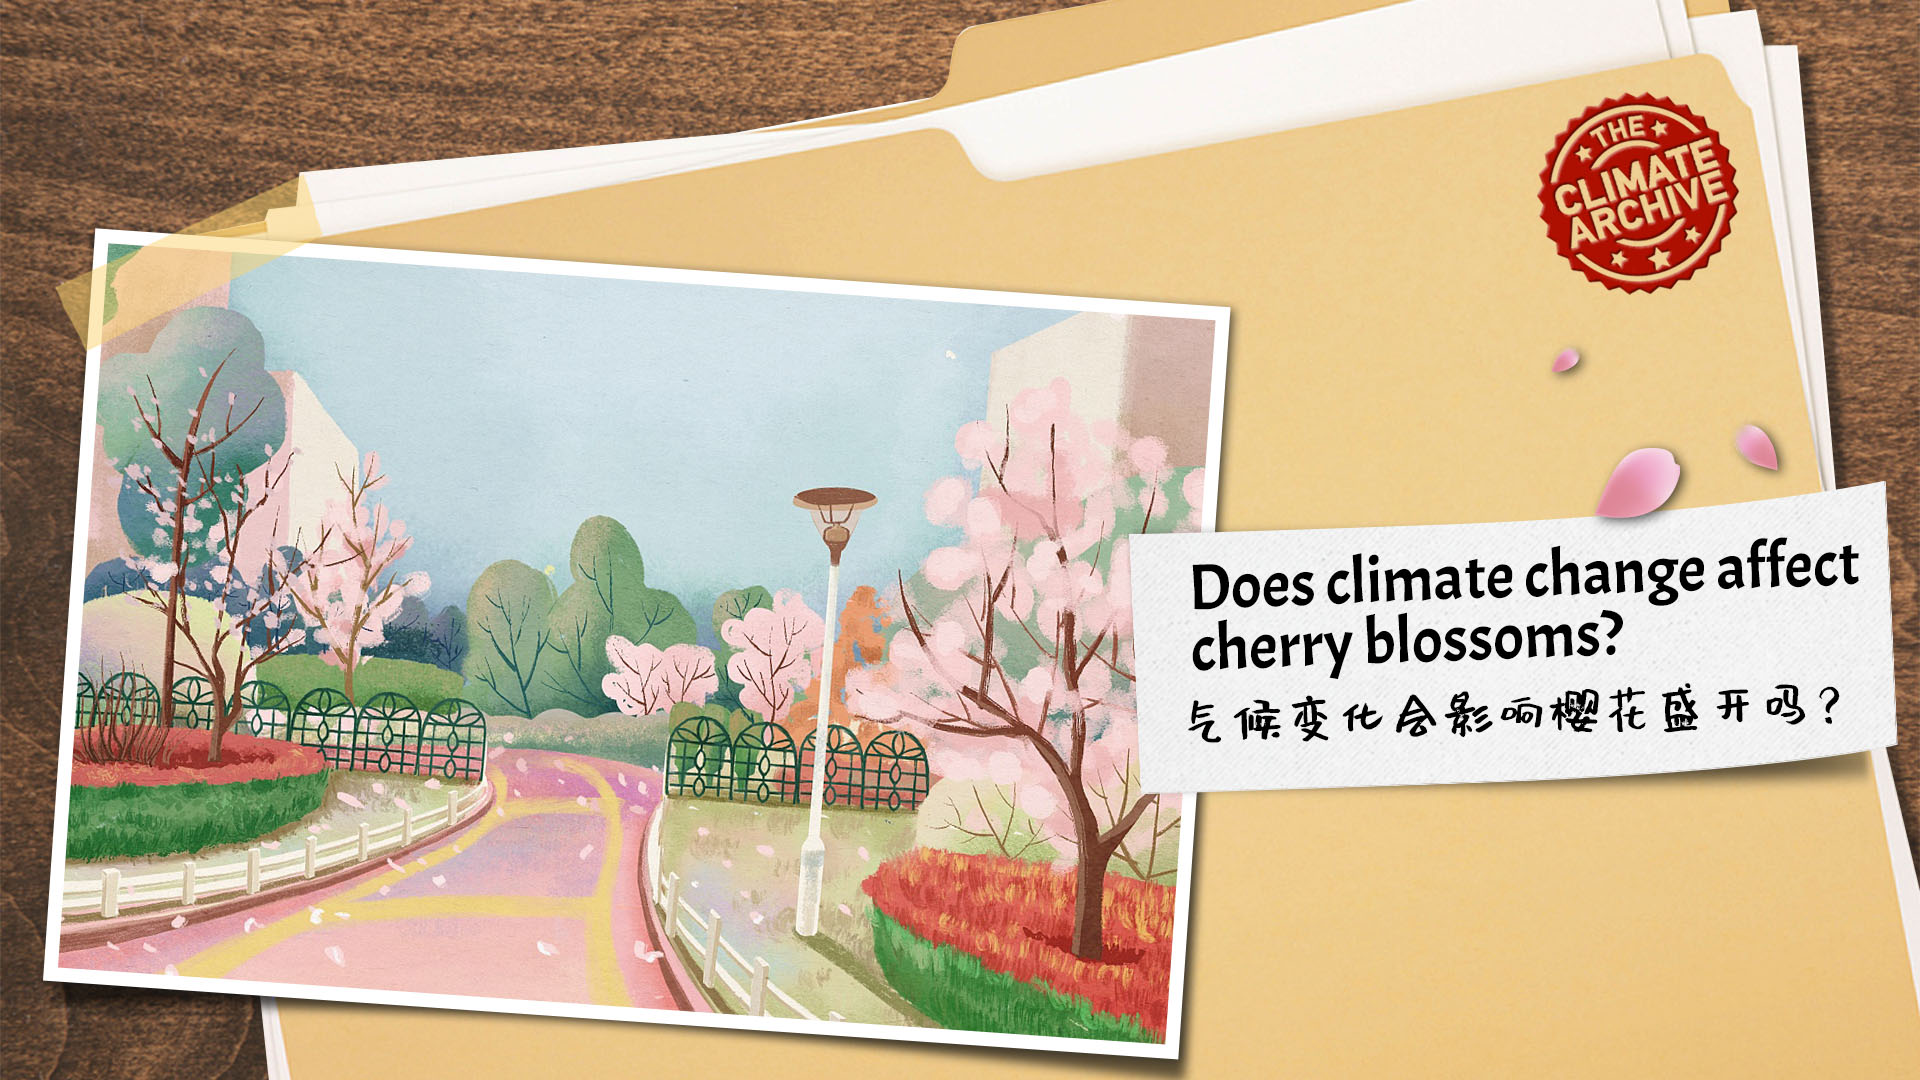 Climate Archive: Does climate change affect cherry blossoms?